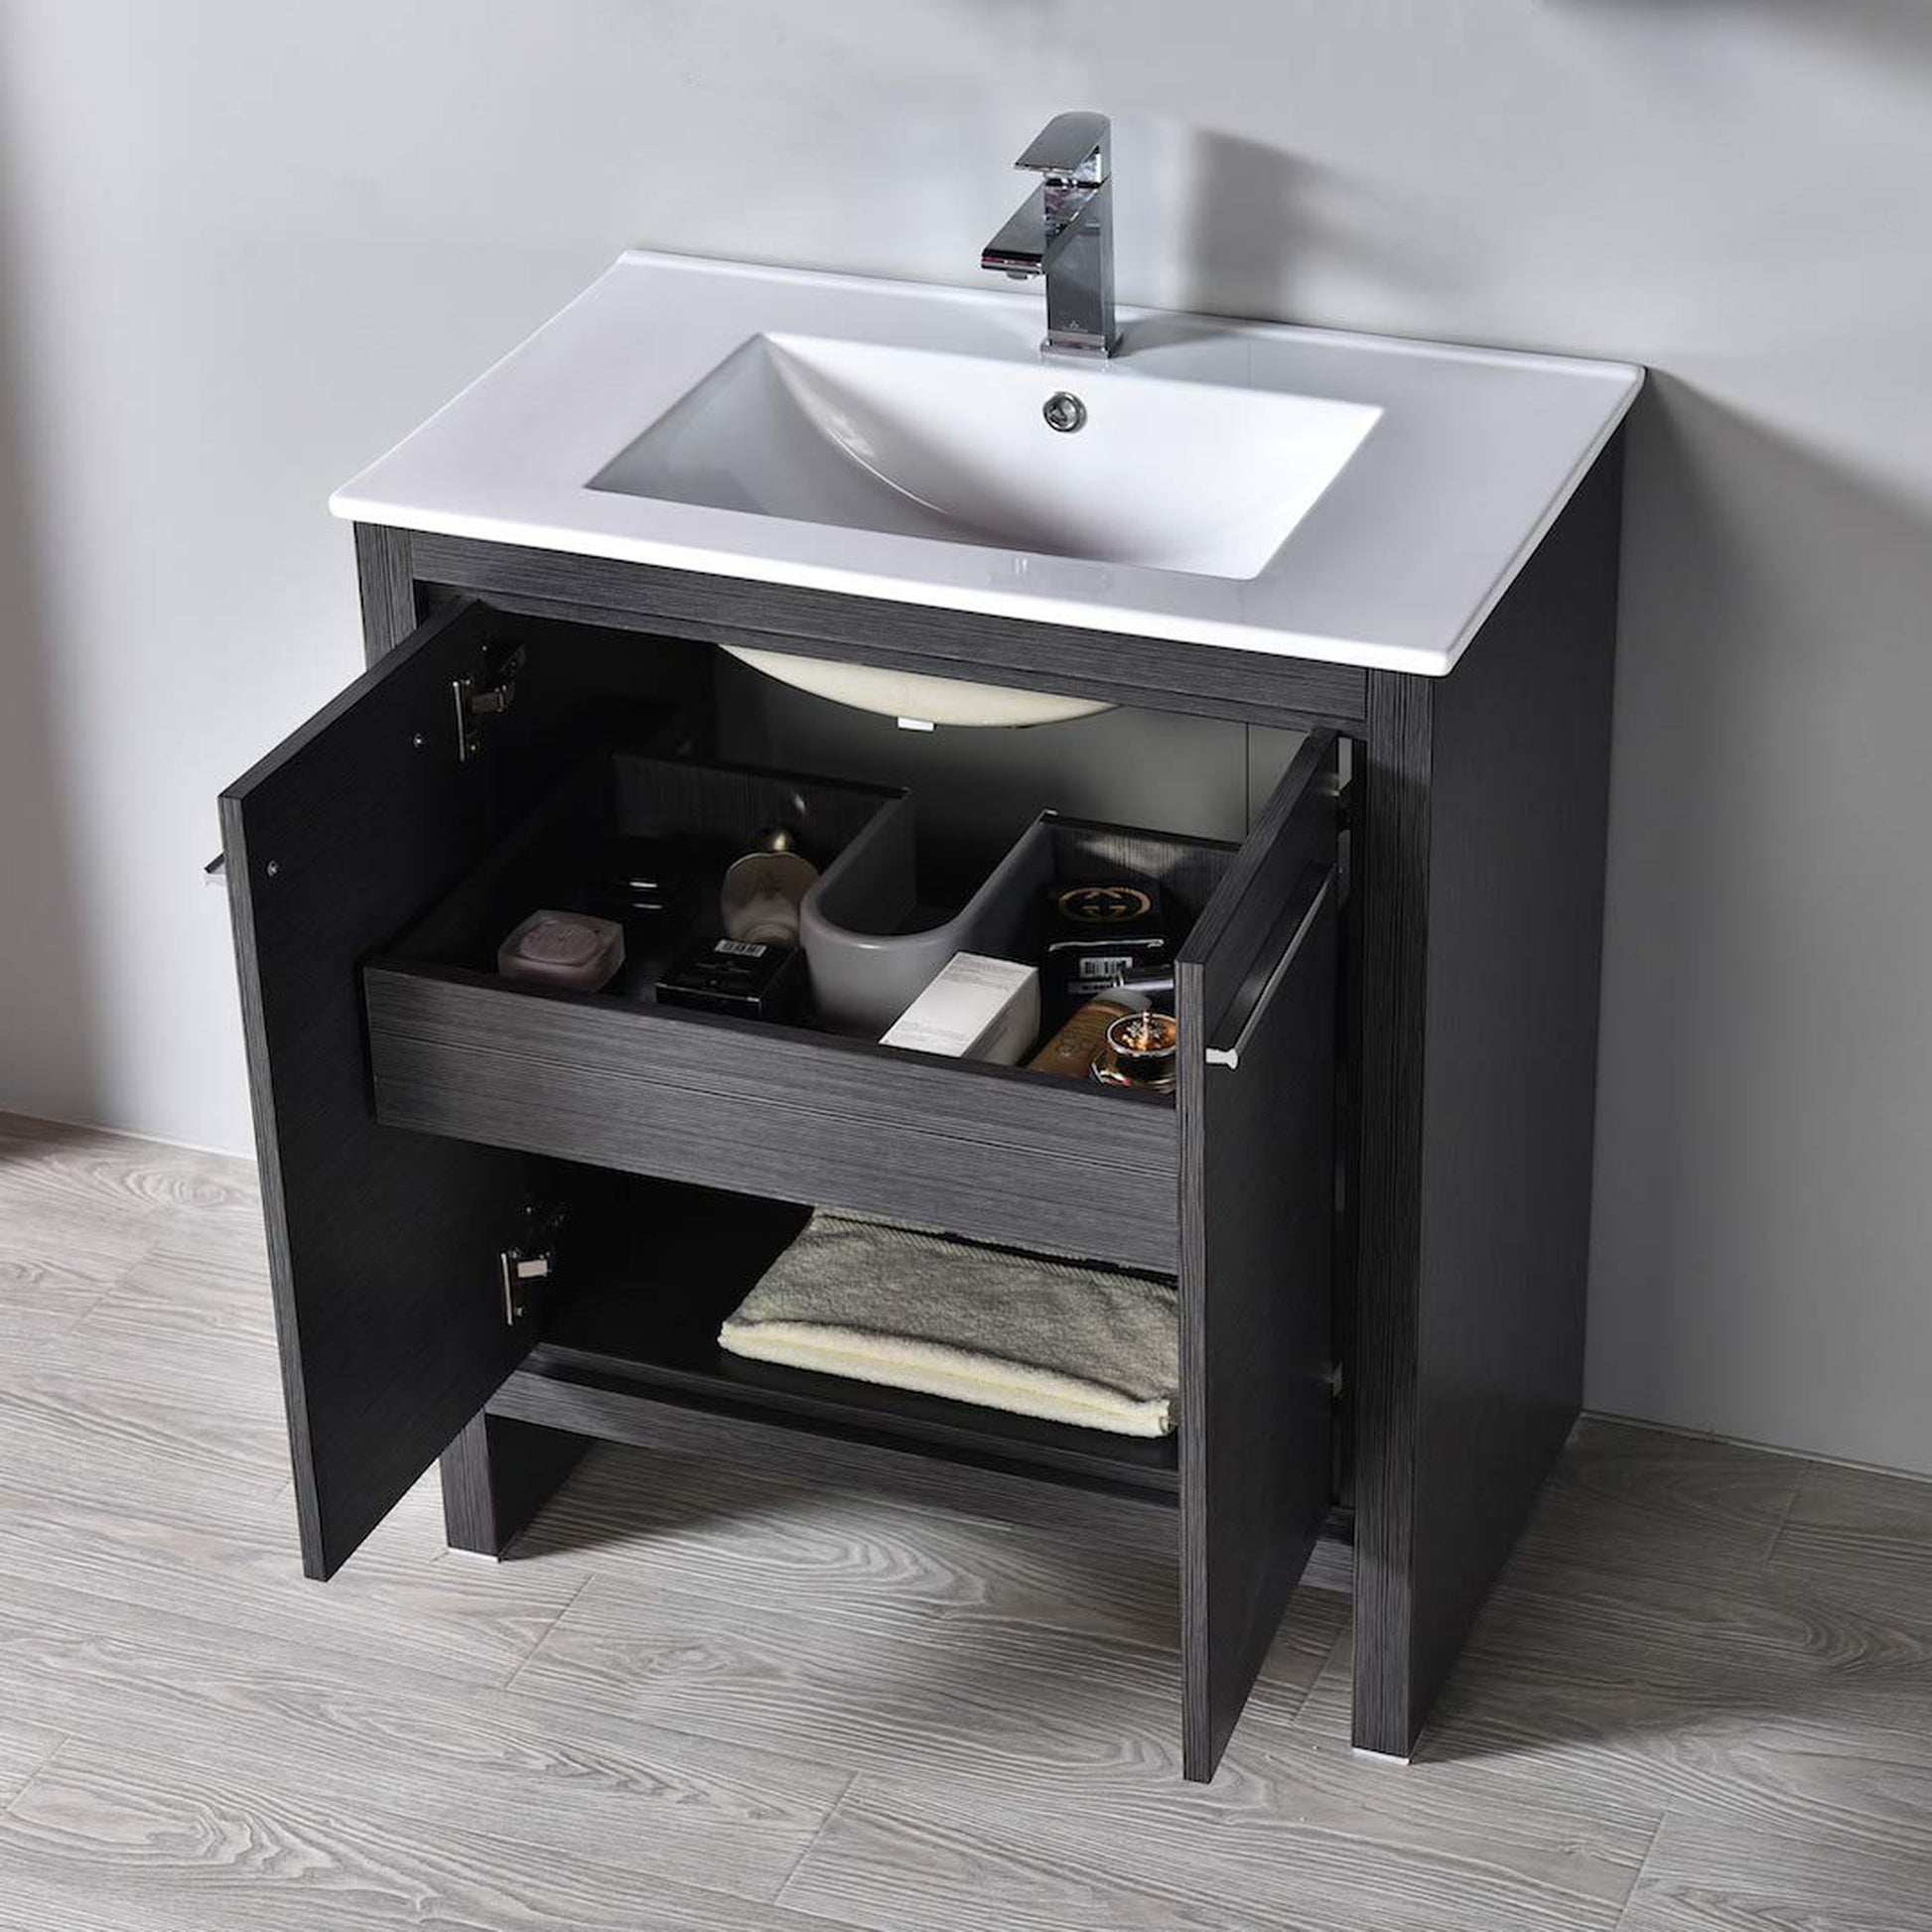 Blossom Milan 30" 2-Door 1-Drawer Silver Gray Freestanding Vanity With Ceramic Drop-In Single Sink And Mirrored Medicine Cabinet